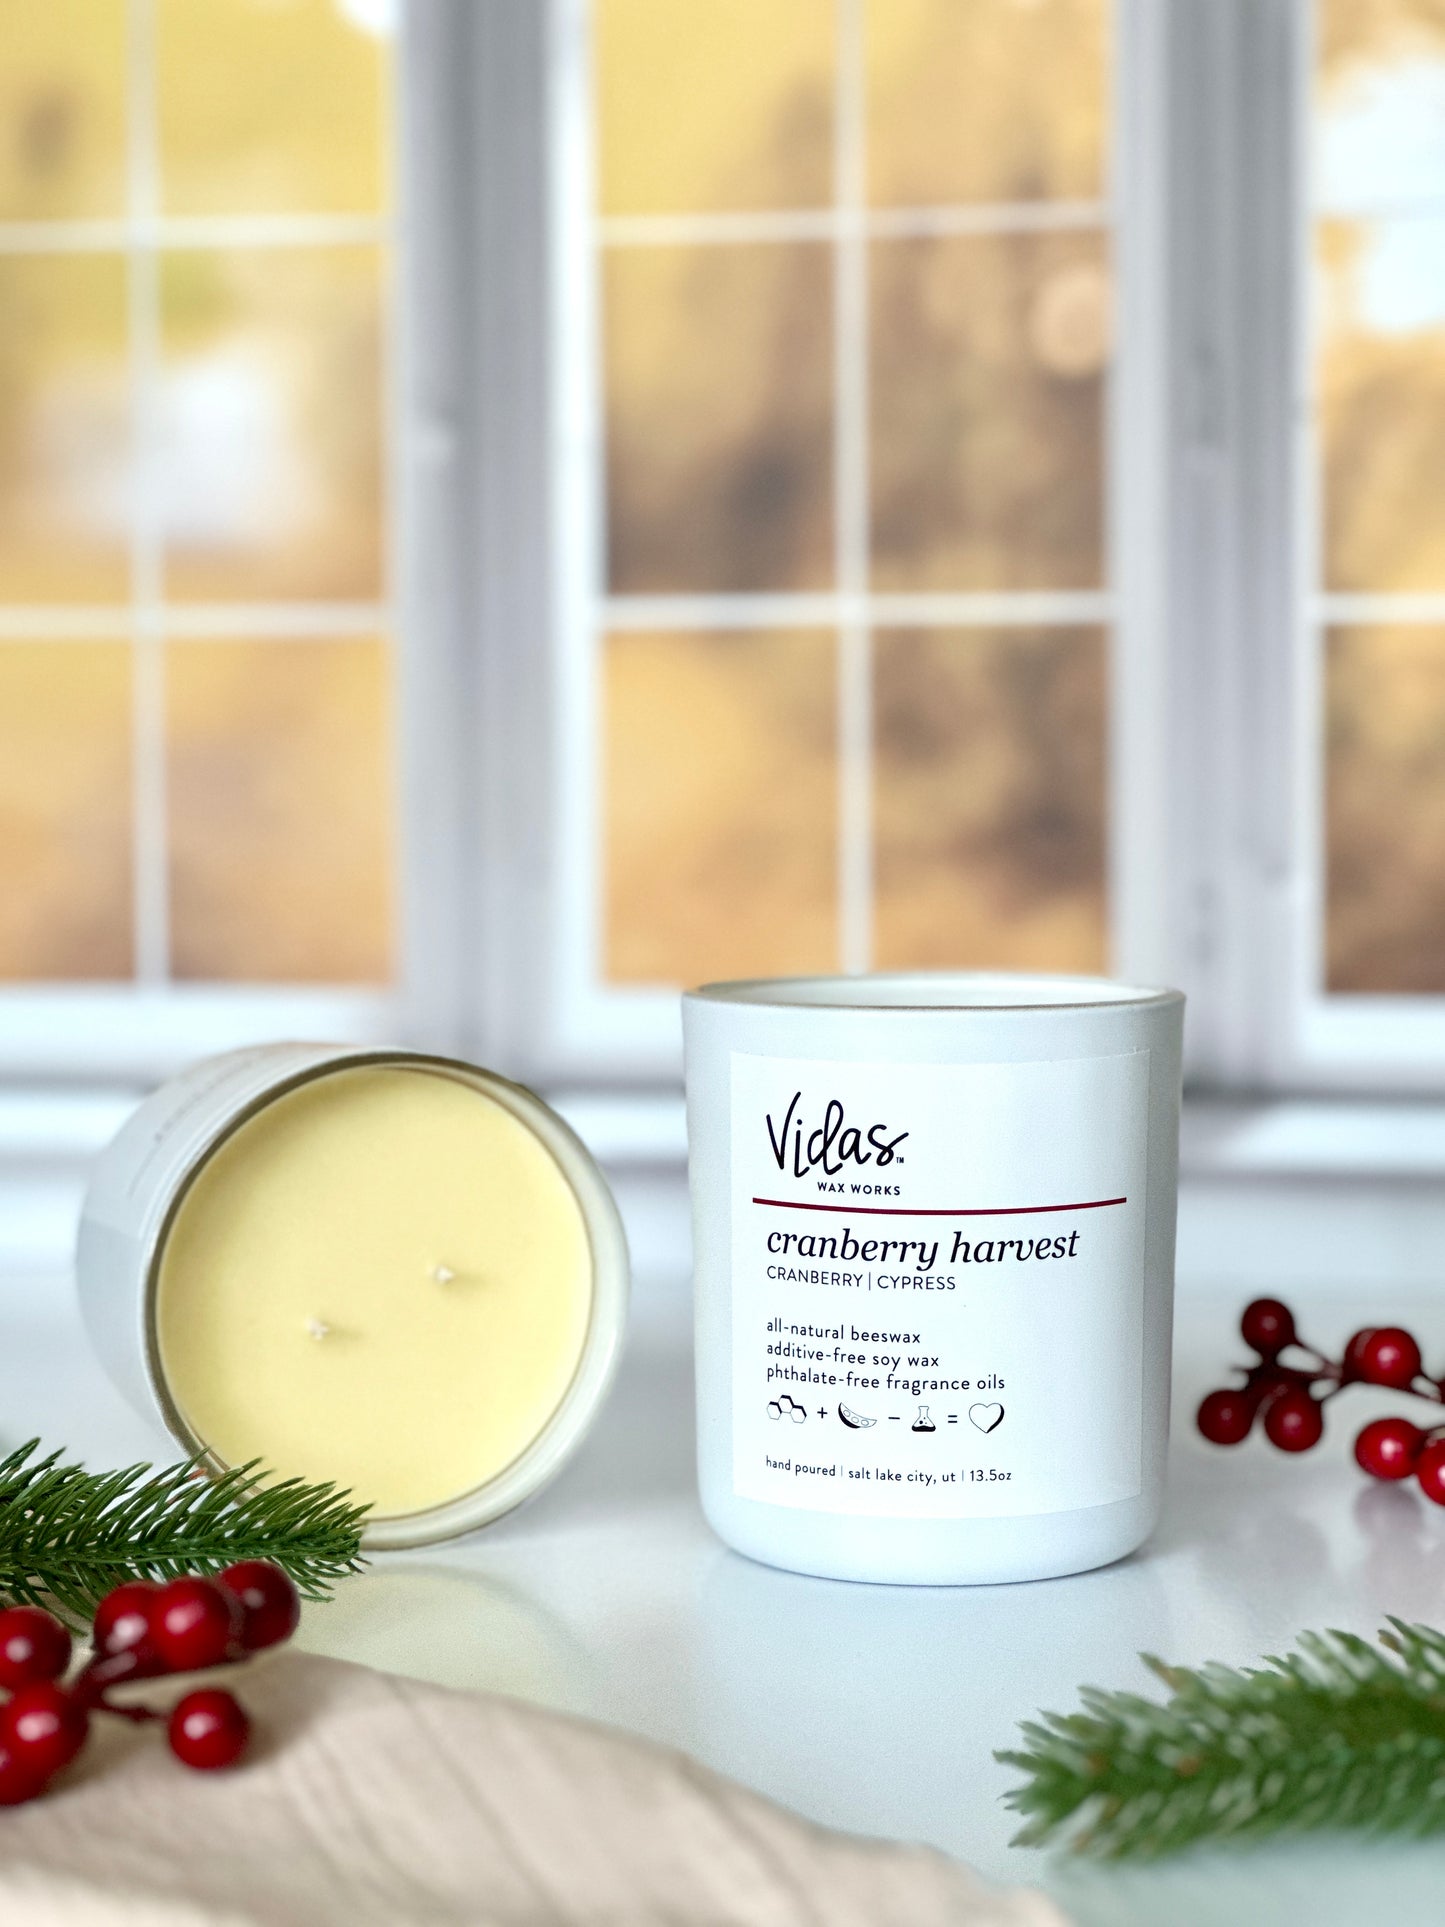 Embrace the essence of fall with our cranberry and cypress fragrance. A 13.5oz candle lays open, showcasing its beautiful yellow tinted beeswax and soy blend beside another candle. Cranberry strands frame the scene, while cypress adds a touch of nature's beauty. The backdrop of blurred yellow fall leaves outside a window completes the seasonal display.